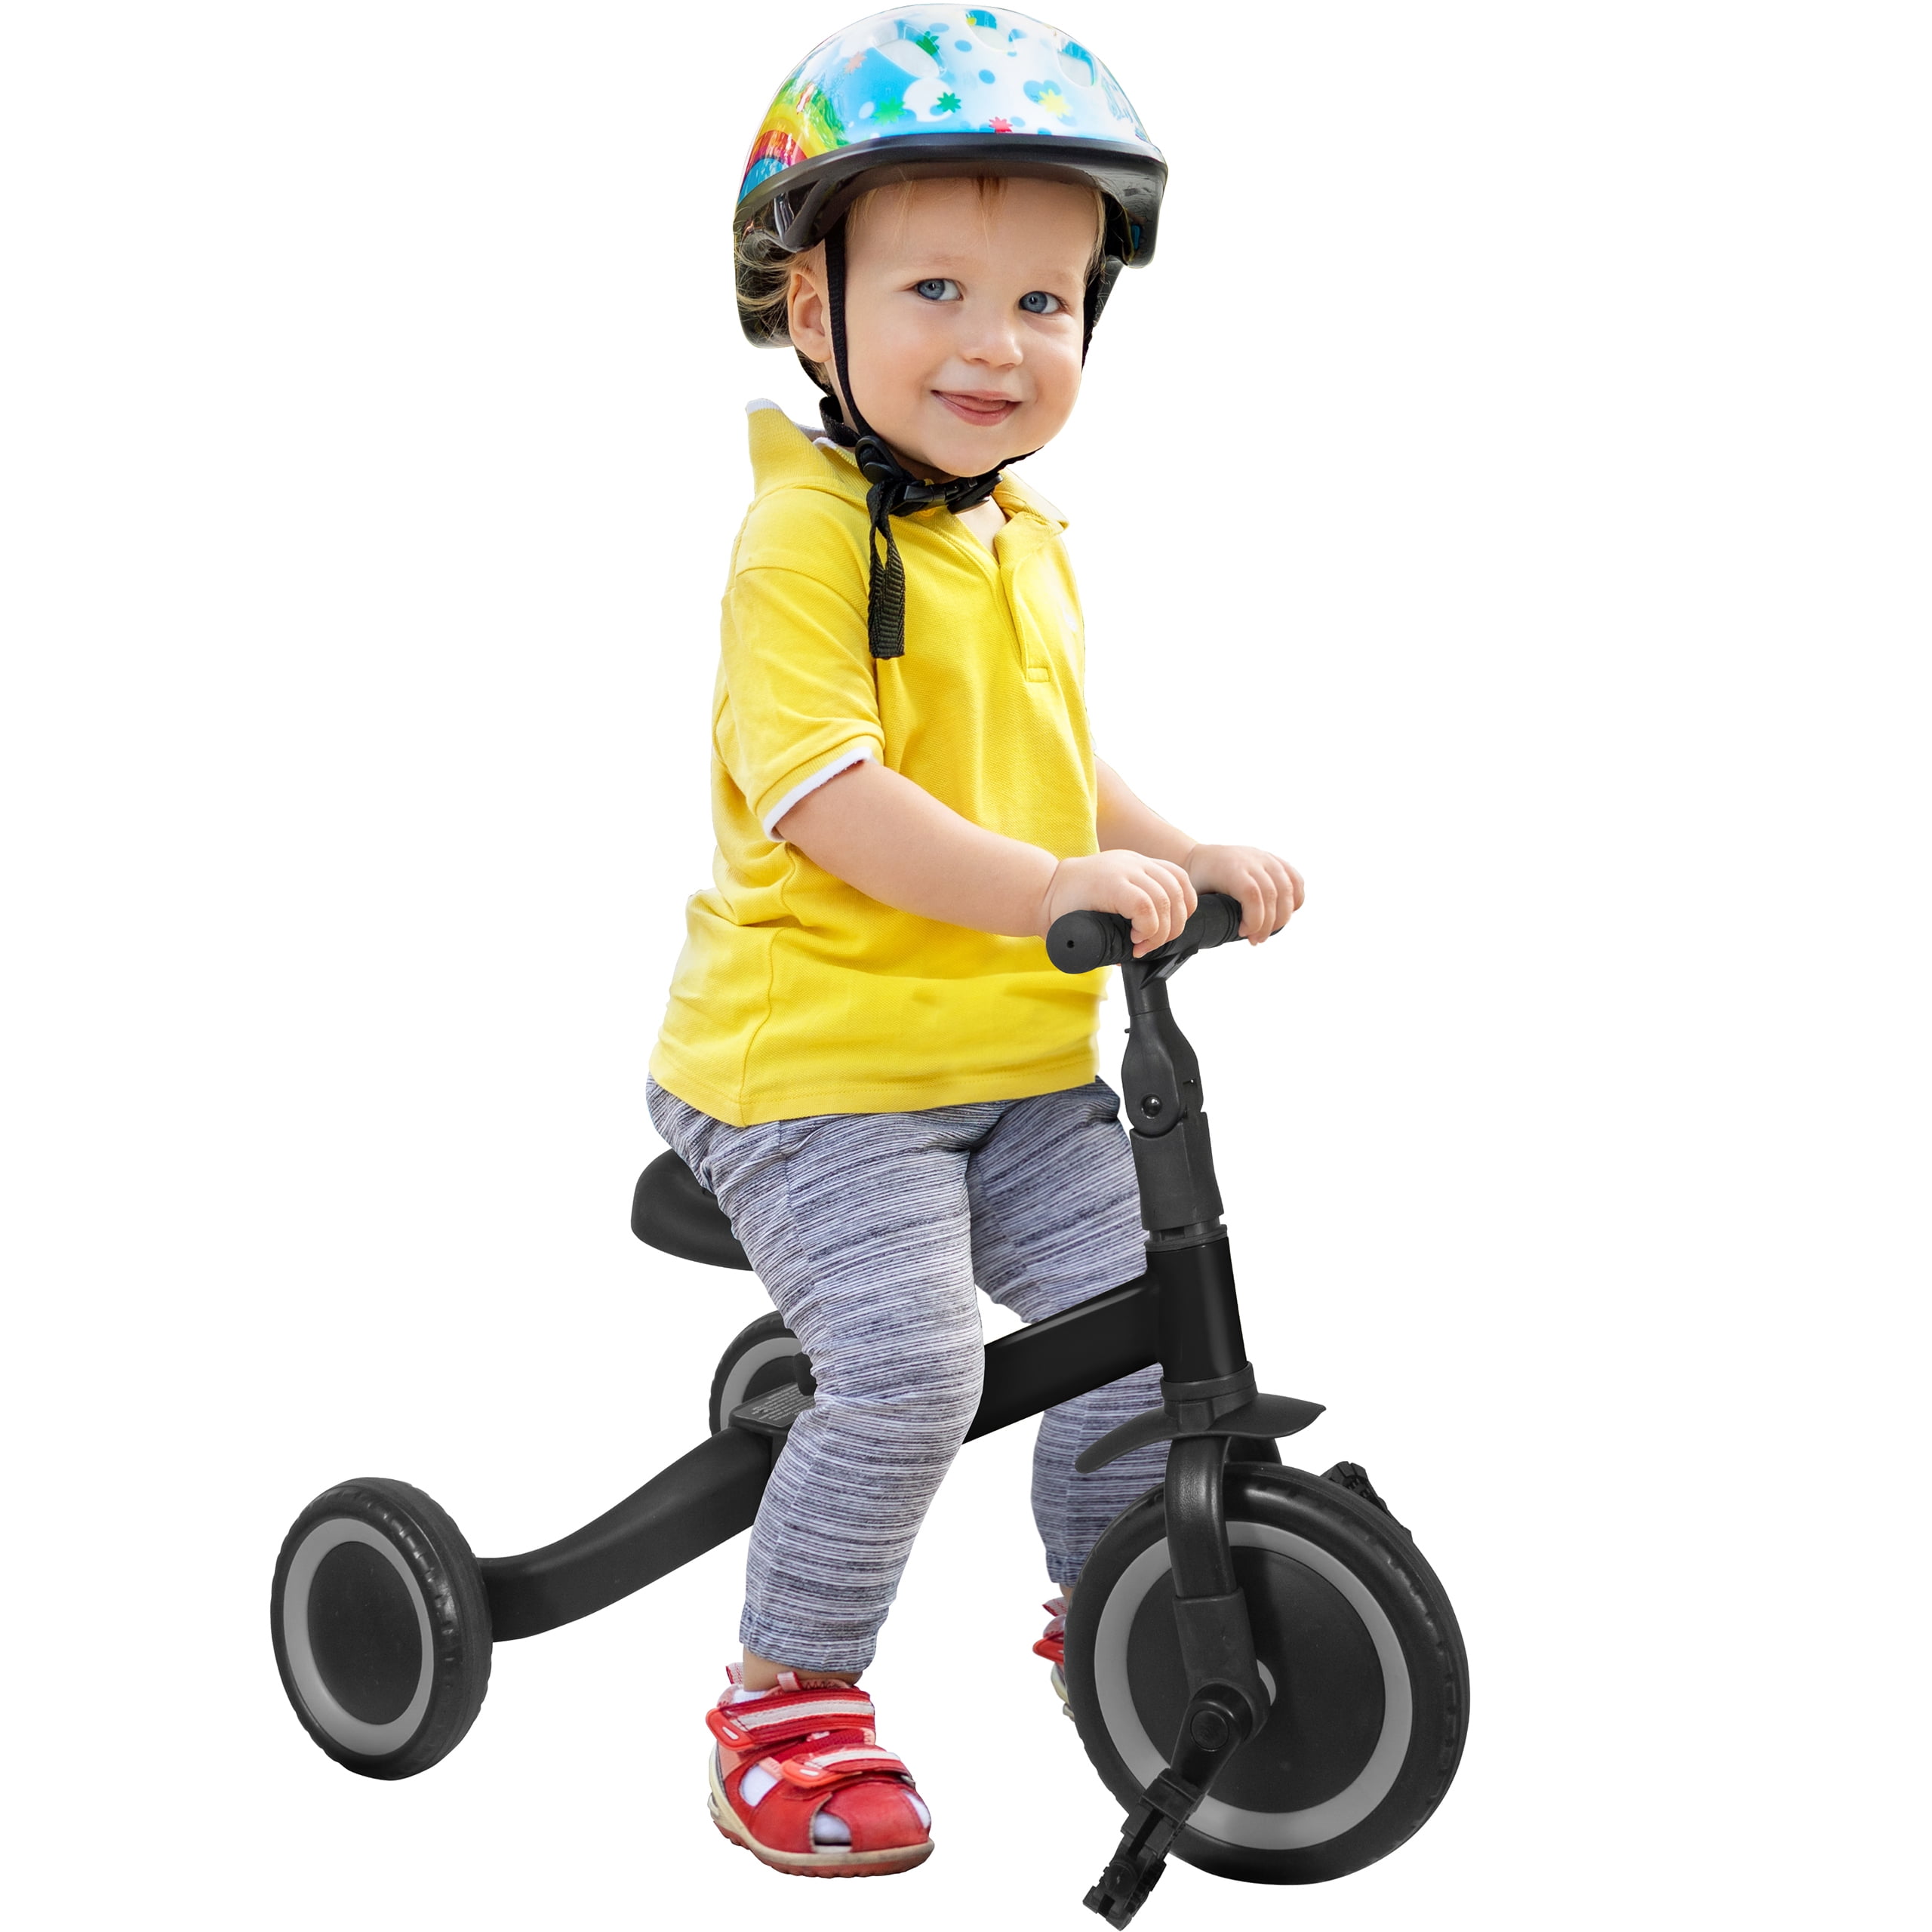 KORIMEFA 3 in 1 Kids Tricycle for 1-3 Years Old Toddler Trike Tricycle Toddler Balance Bike Tricycle Boys Girls Baby Bike Infant Trike with Adjustable Seat Height Green 